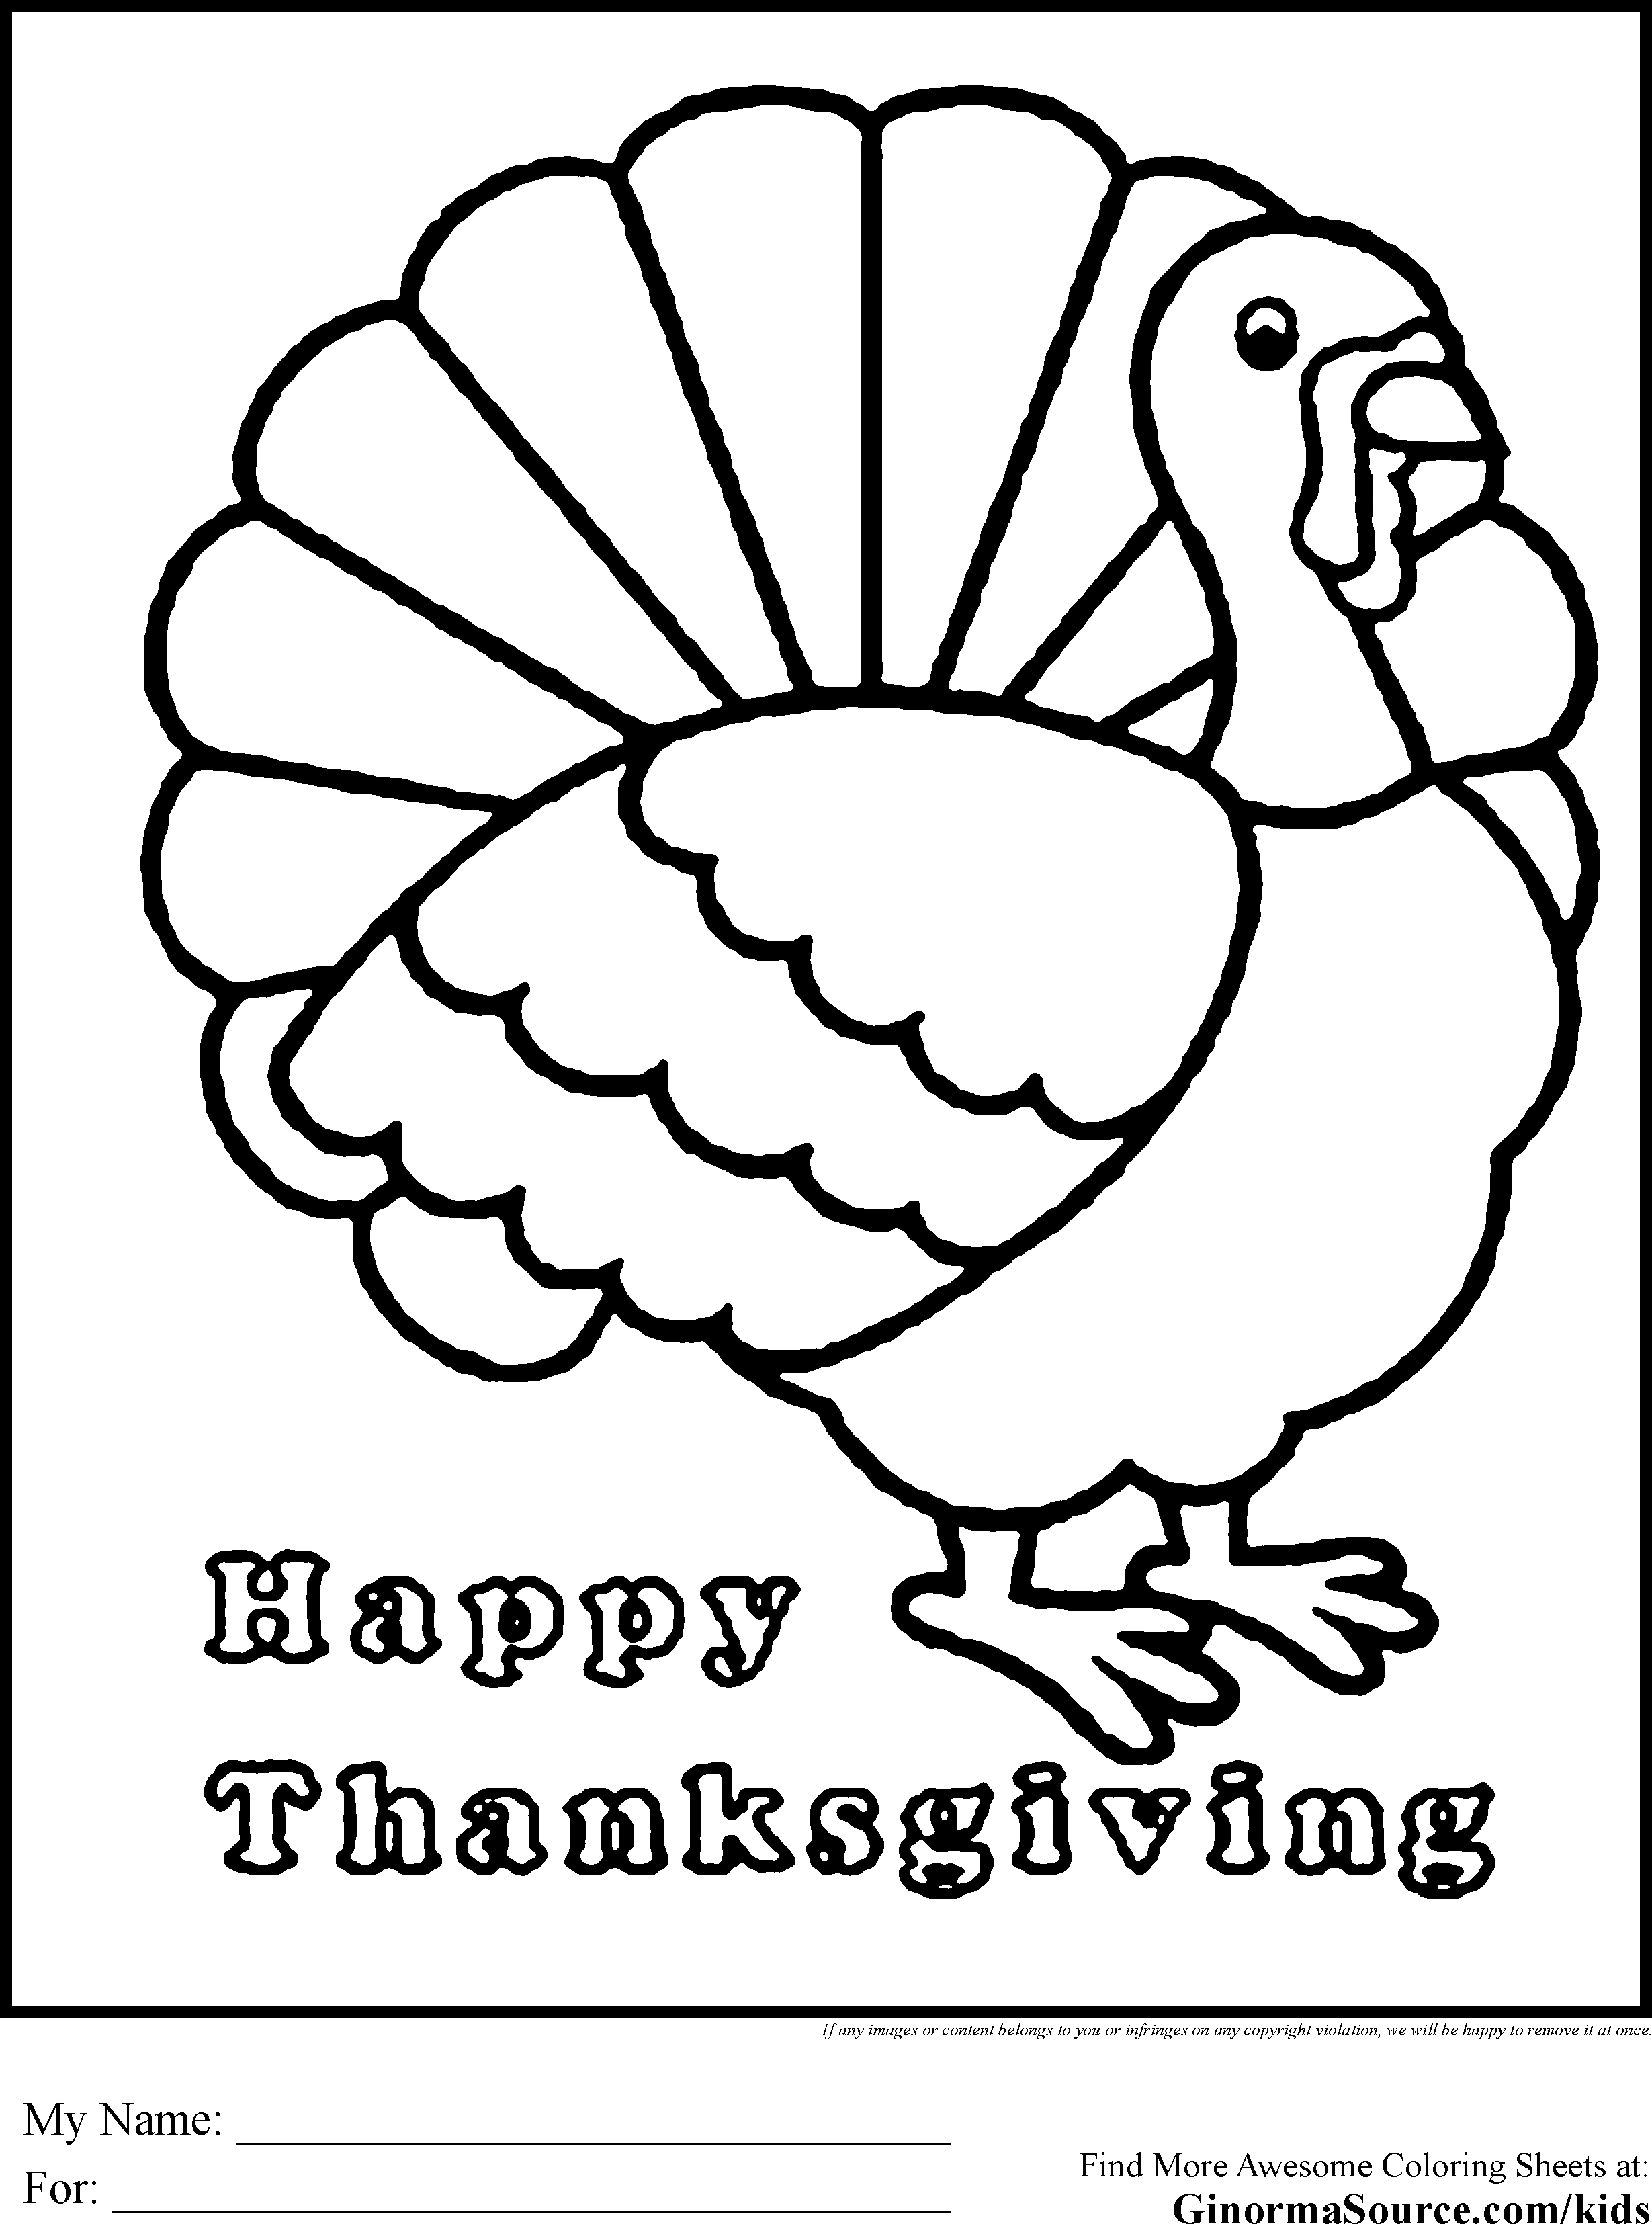 20 Free Pictures For: Printable Thanksgiving Coloring Pages. Temoon - Free Printable Turkey Coloring Pages